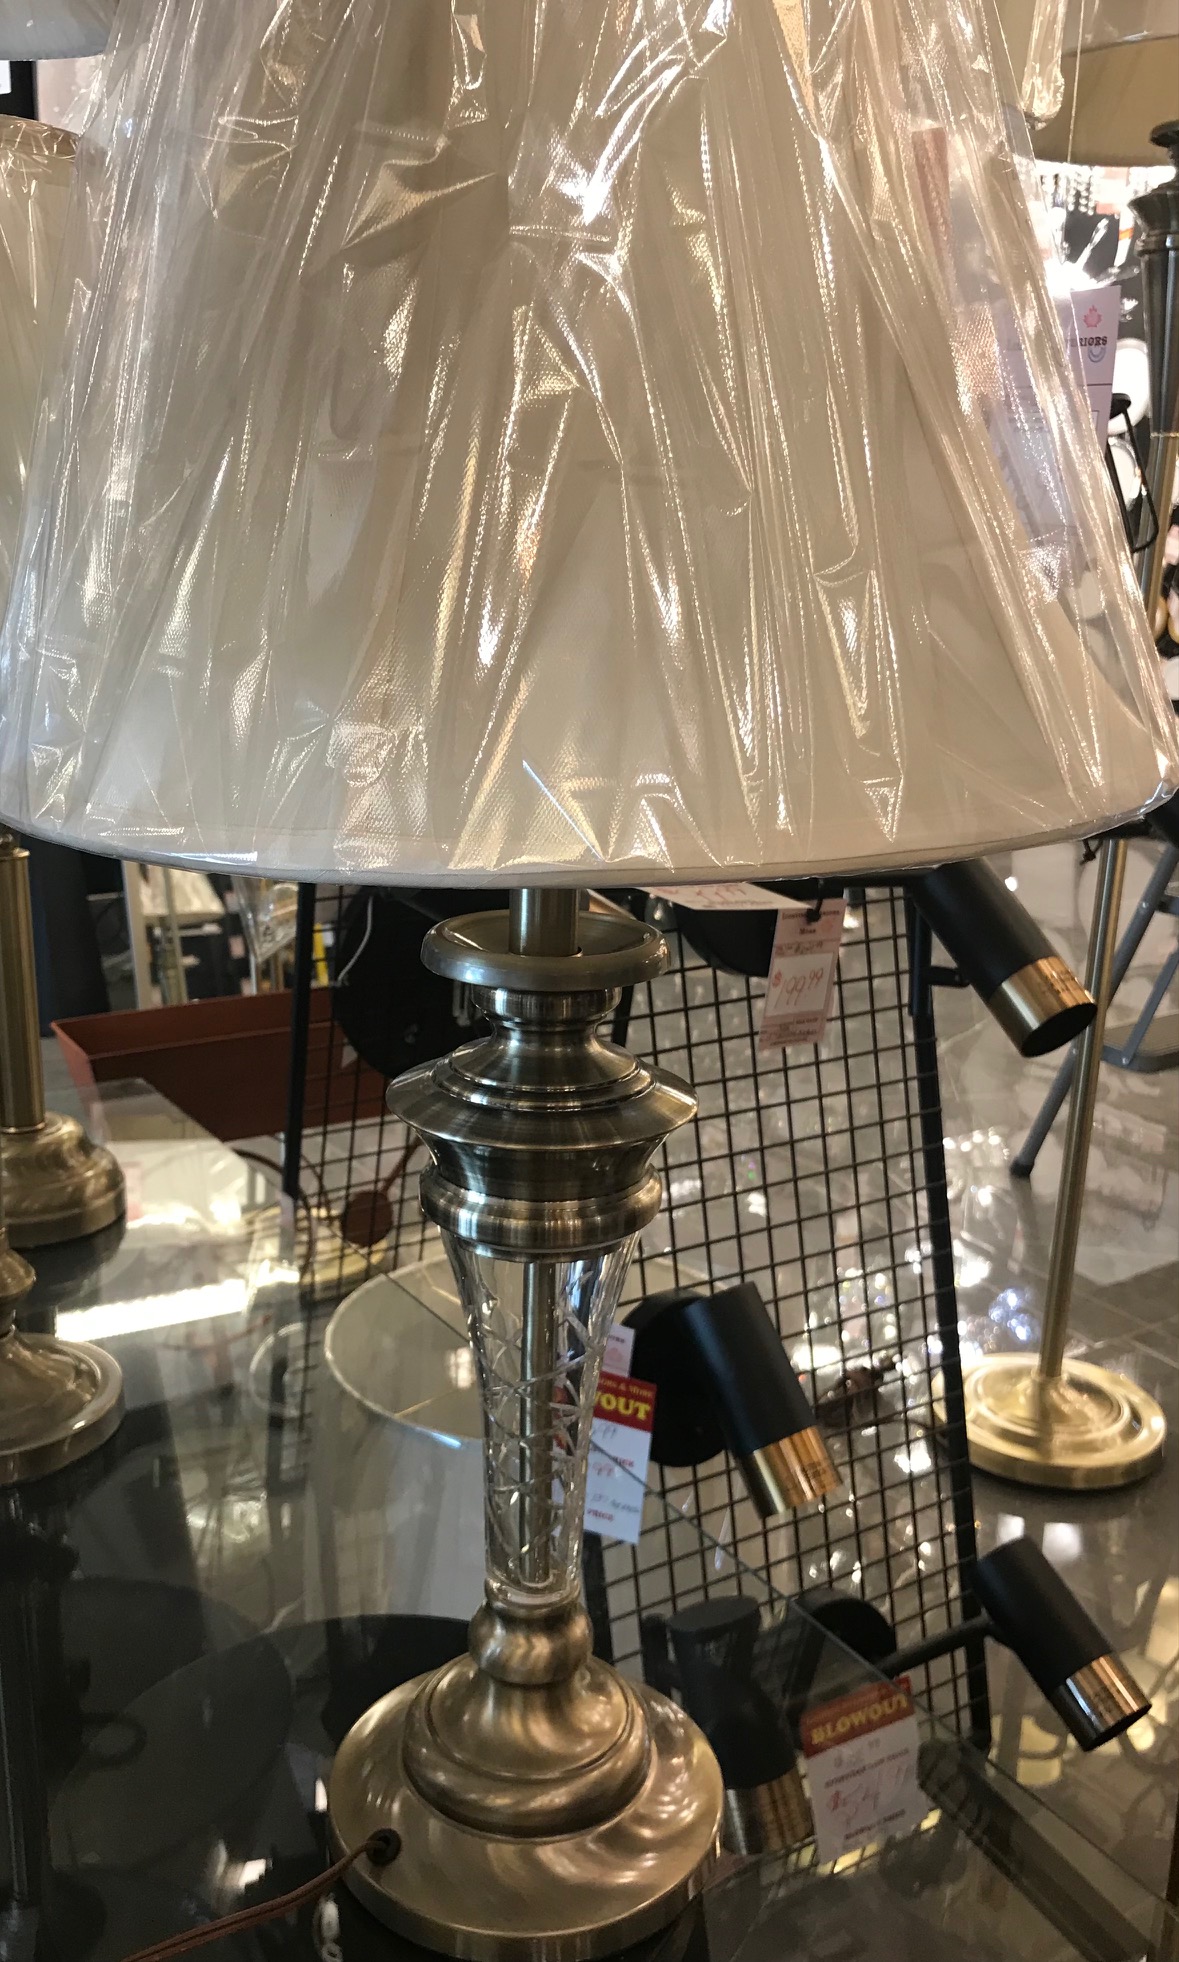 40337 Crystal Table Lamp
Made in Canada
Available in Antique Brass
or Brushed Chrome
Regular Price $279.99
Sale Price $195.99